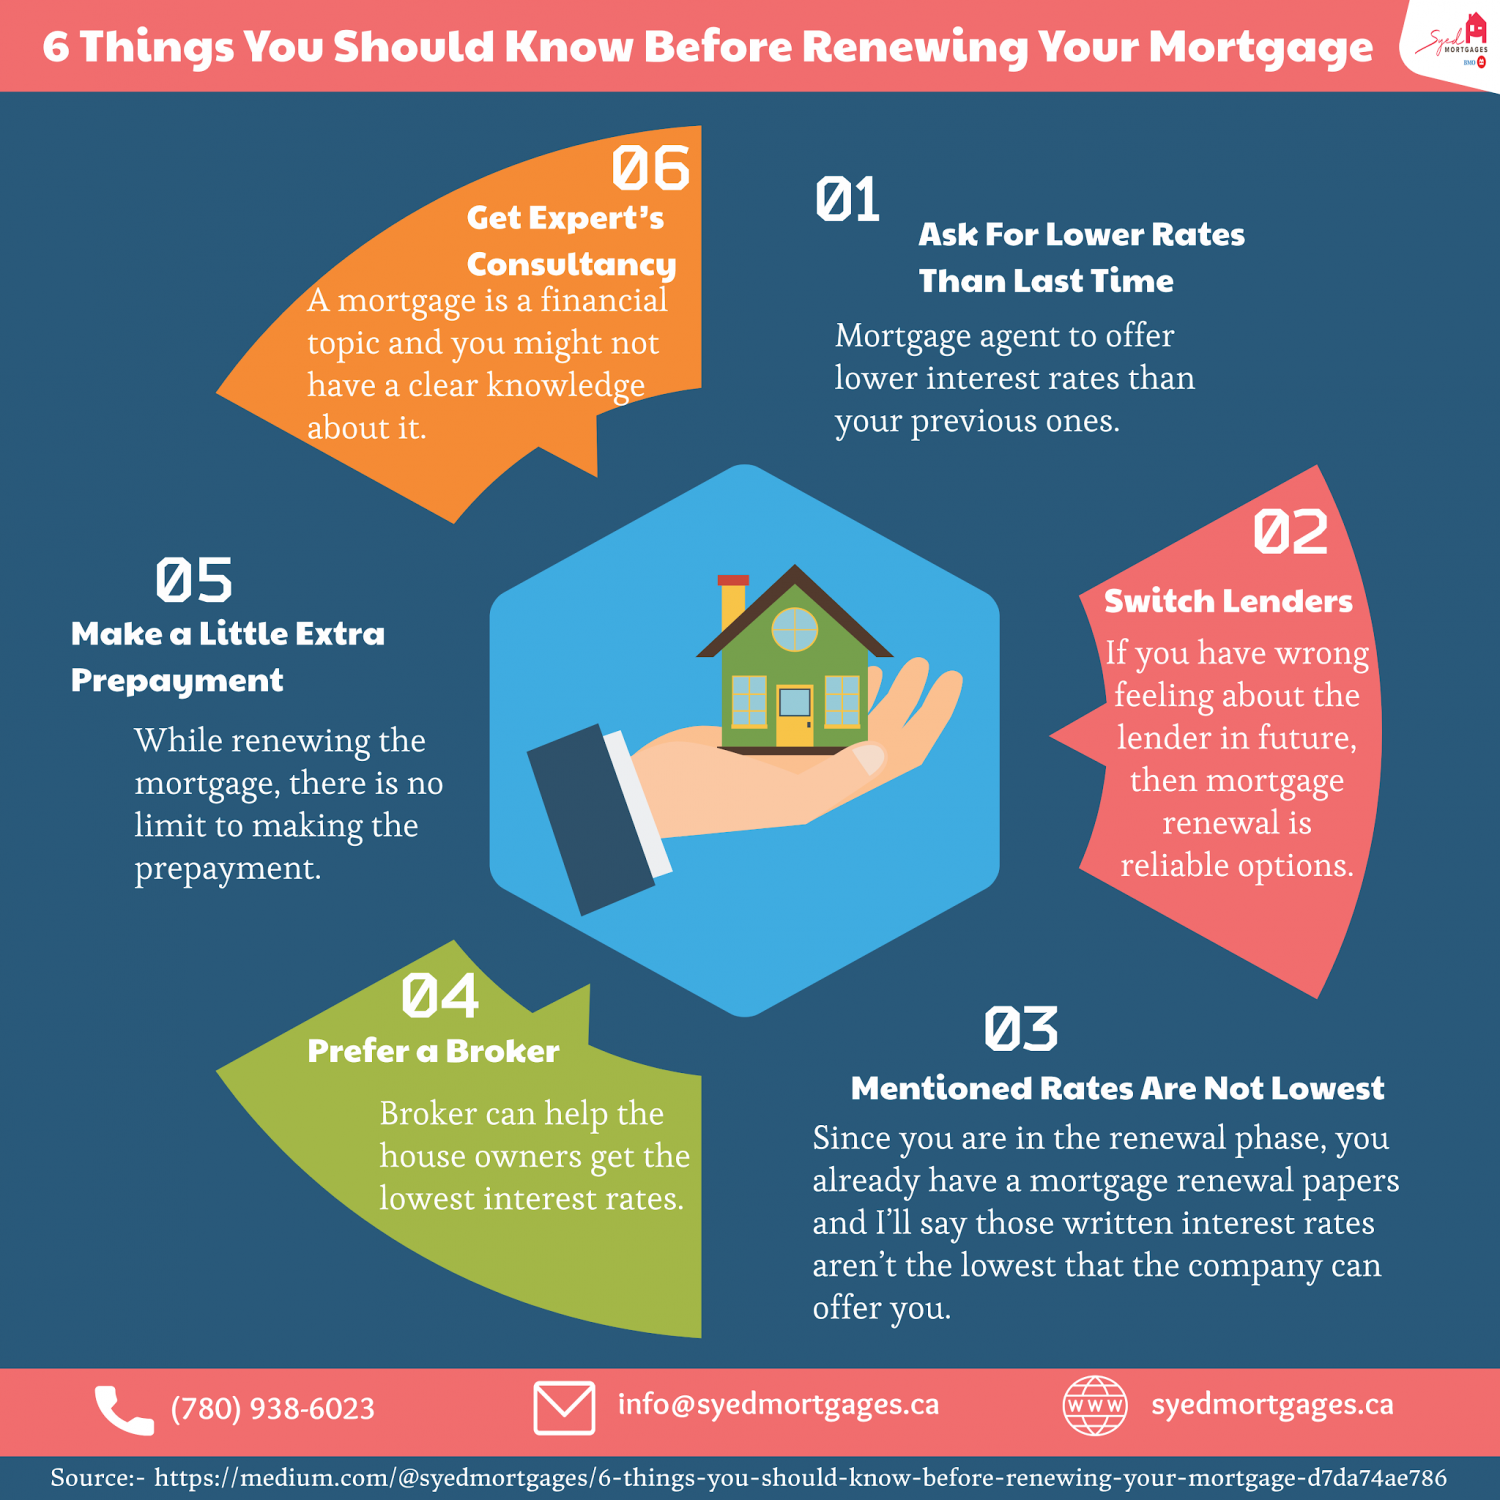 6 Things You Should Know Before Renewing Your Mortgage Infographic